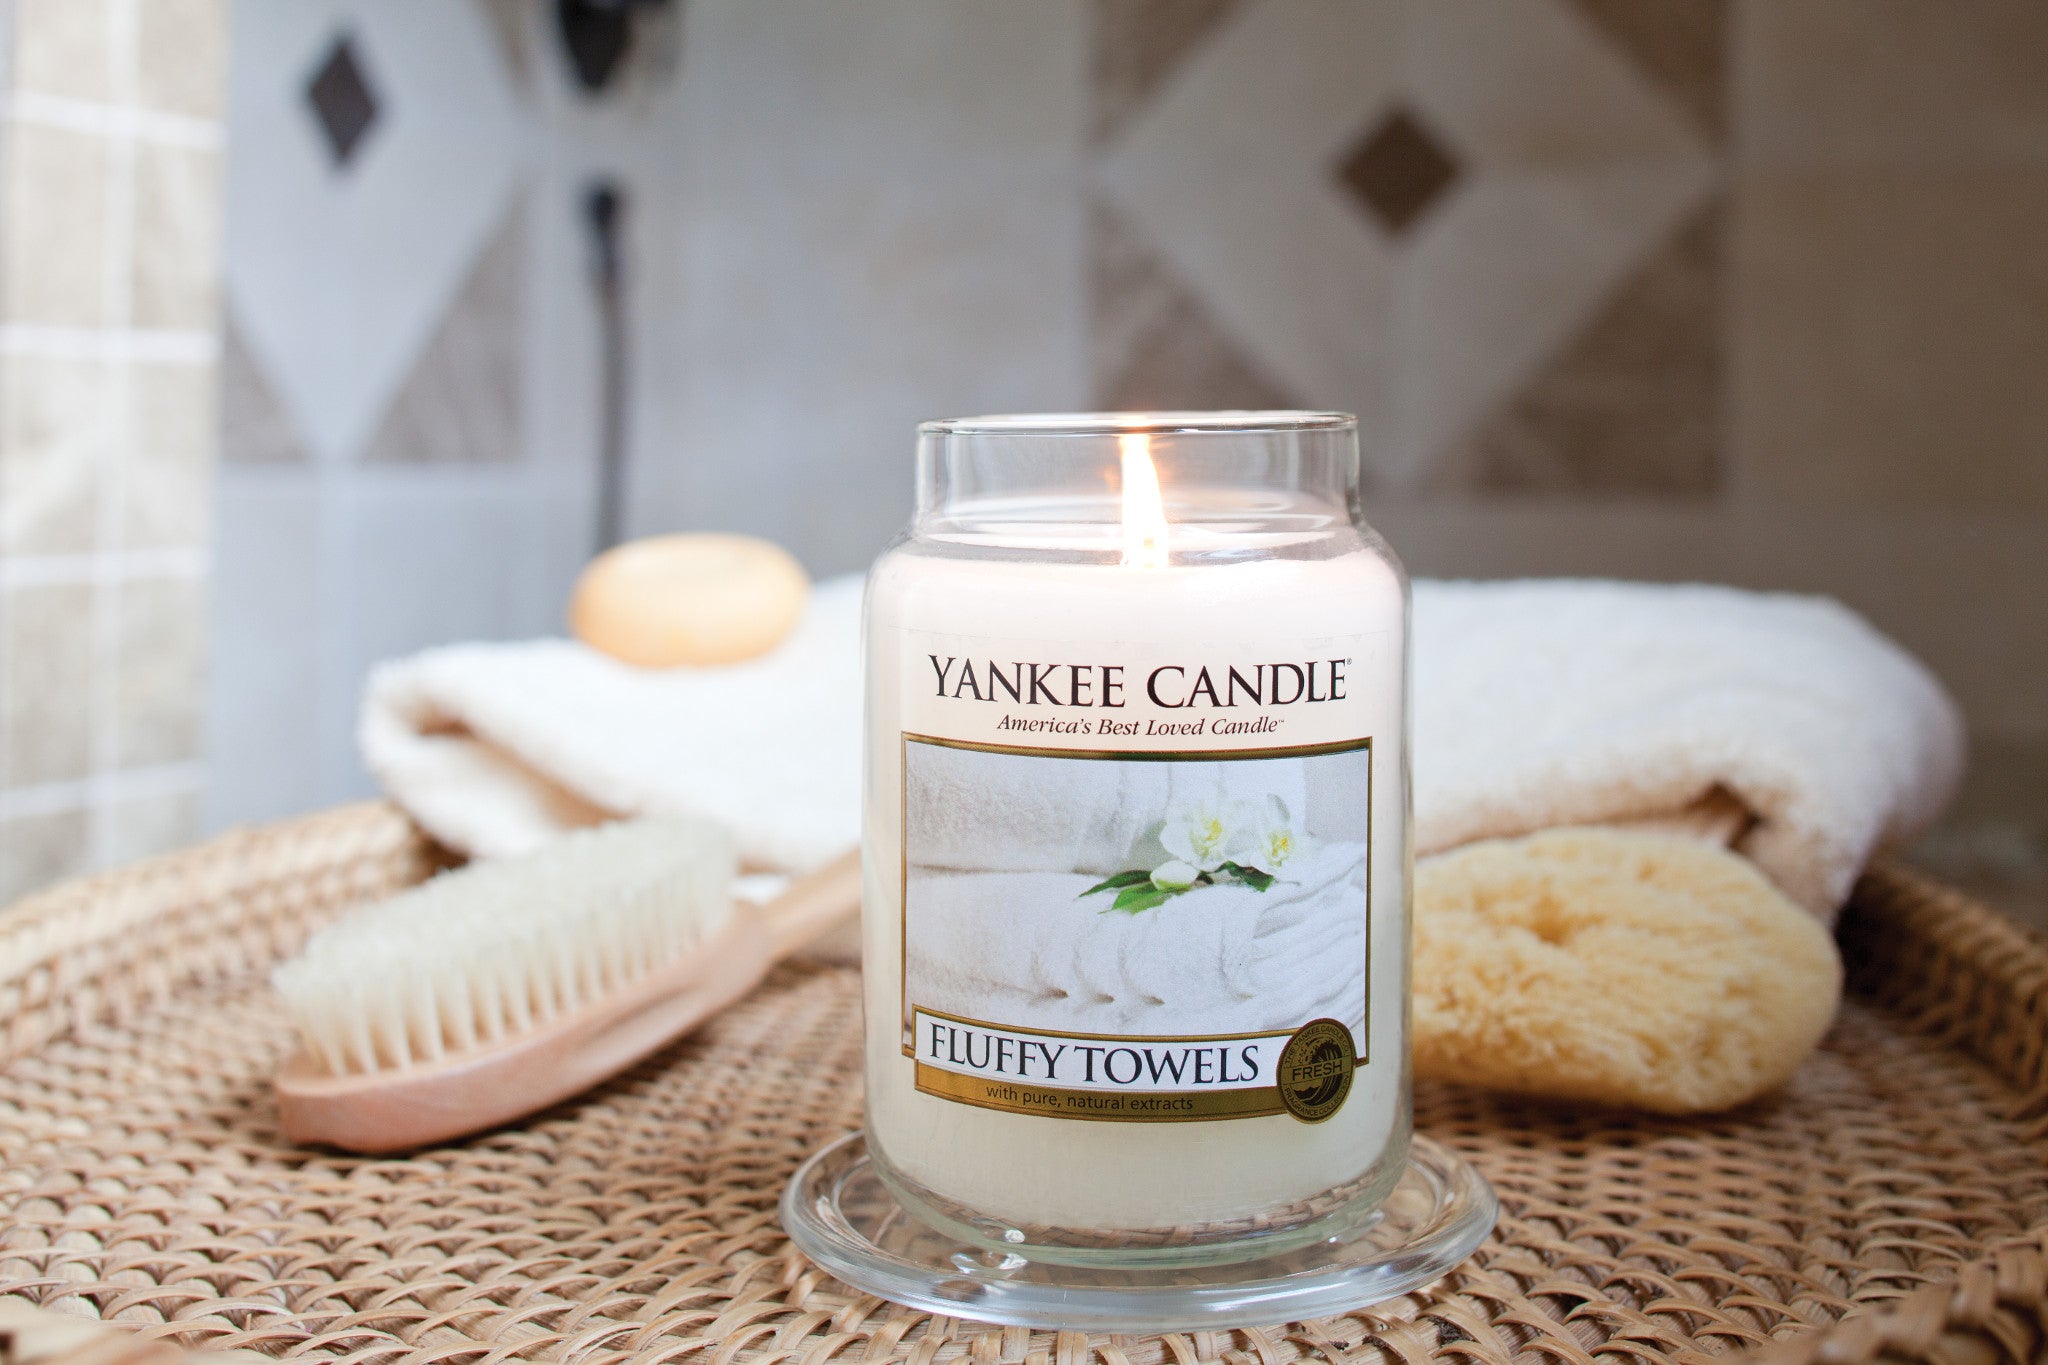 FLUFFY TOWELS -Yankee Candle- Giara Piccola – Candle With Care